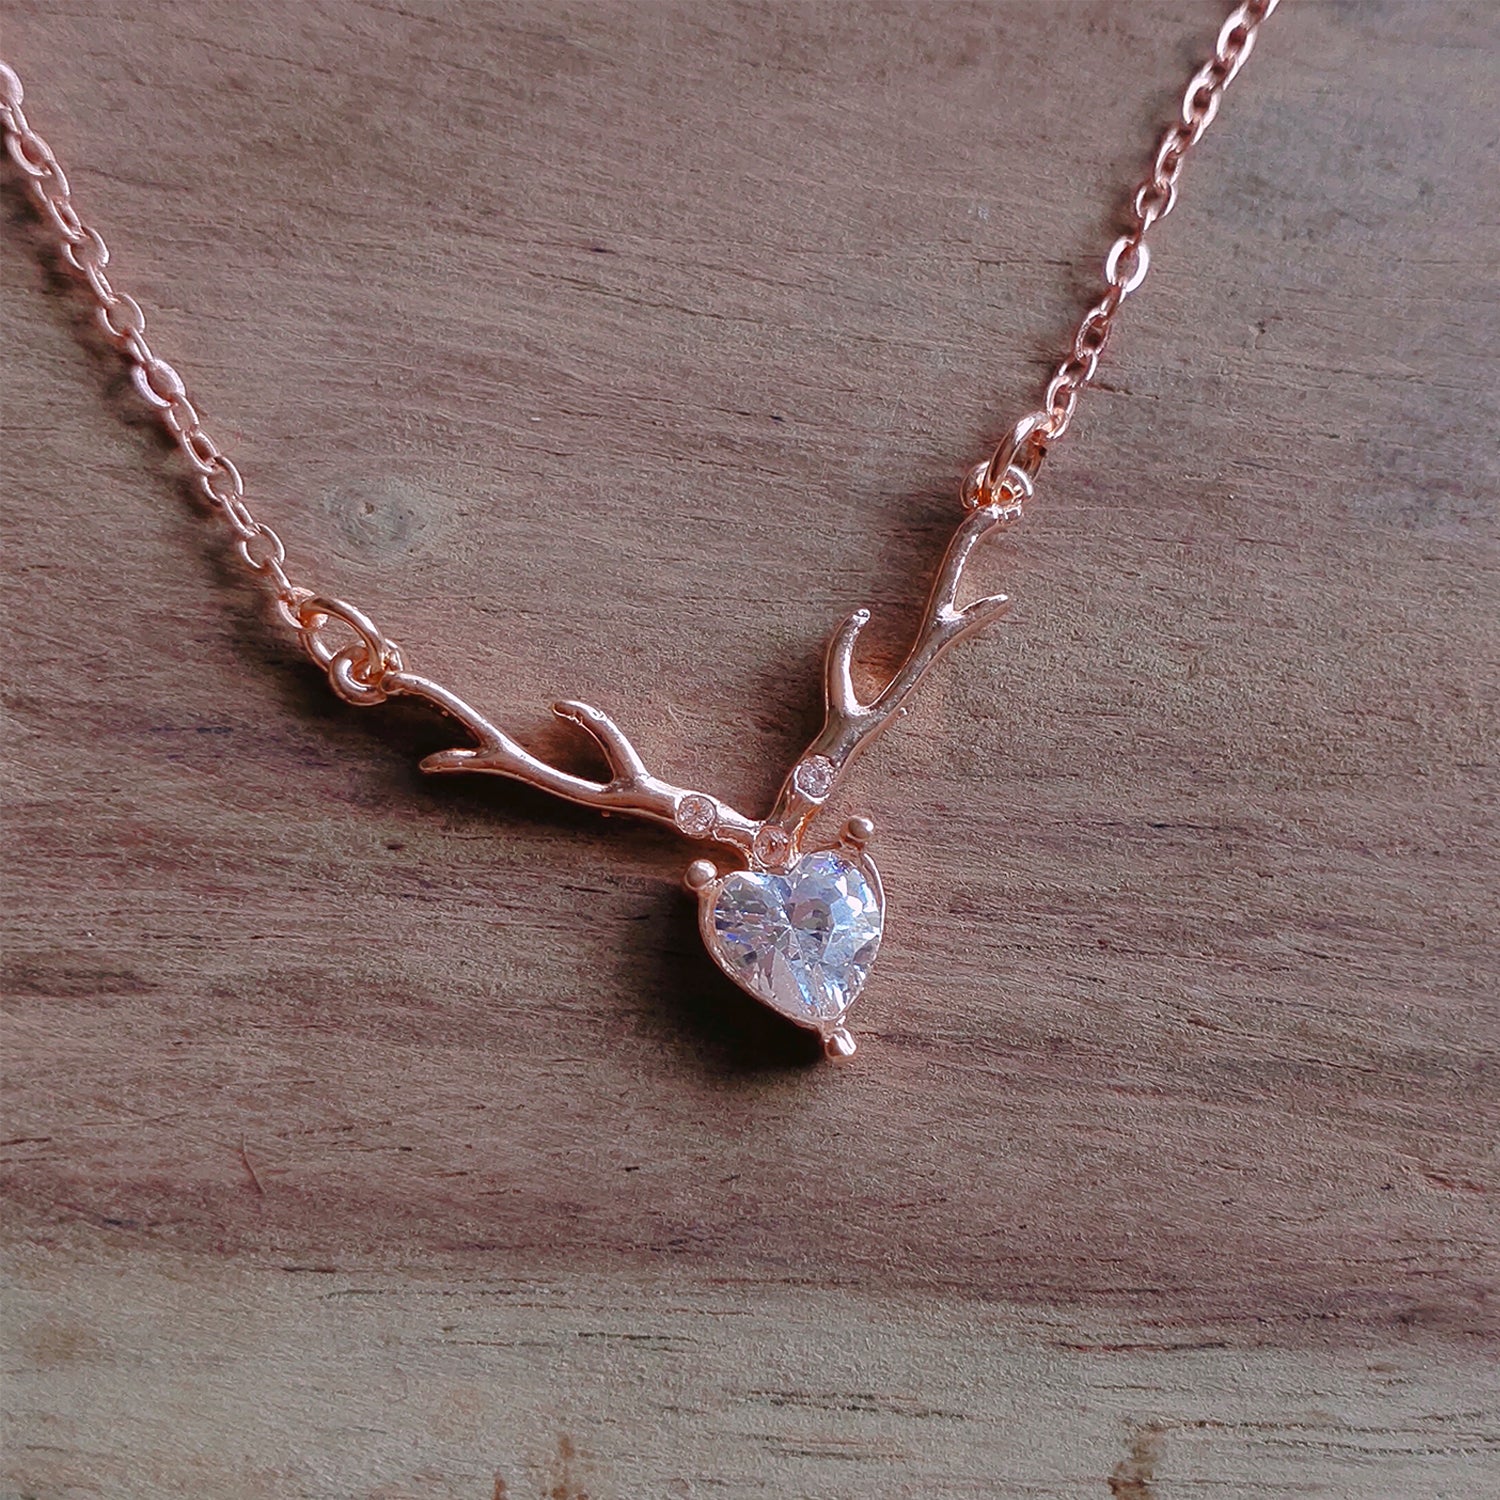 Deer Heart Shaped Pendant with Chain